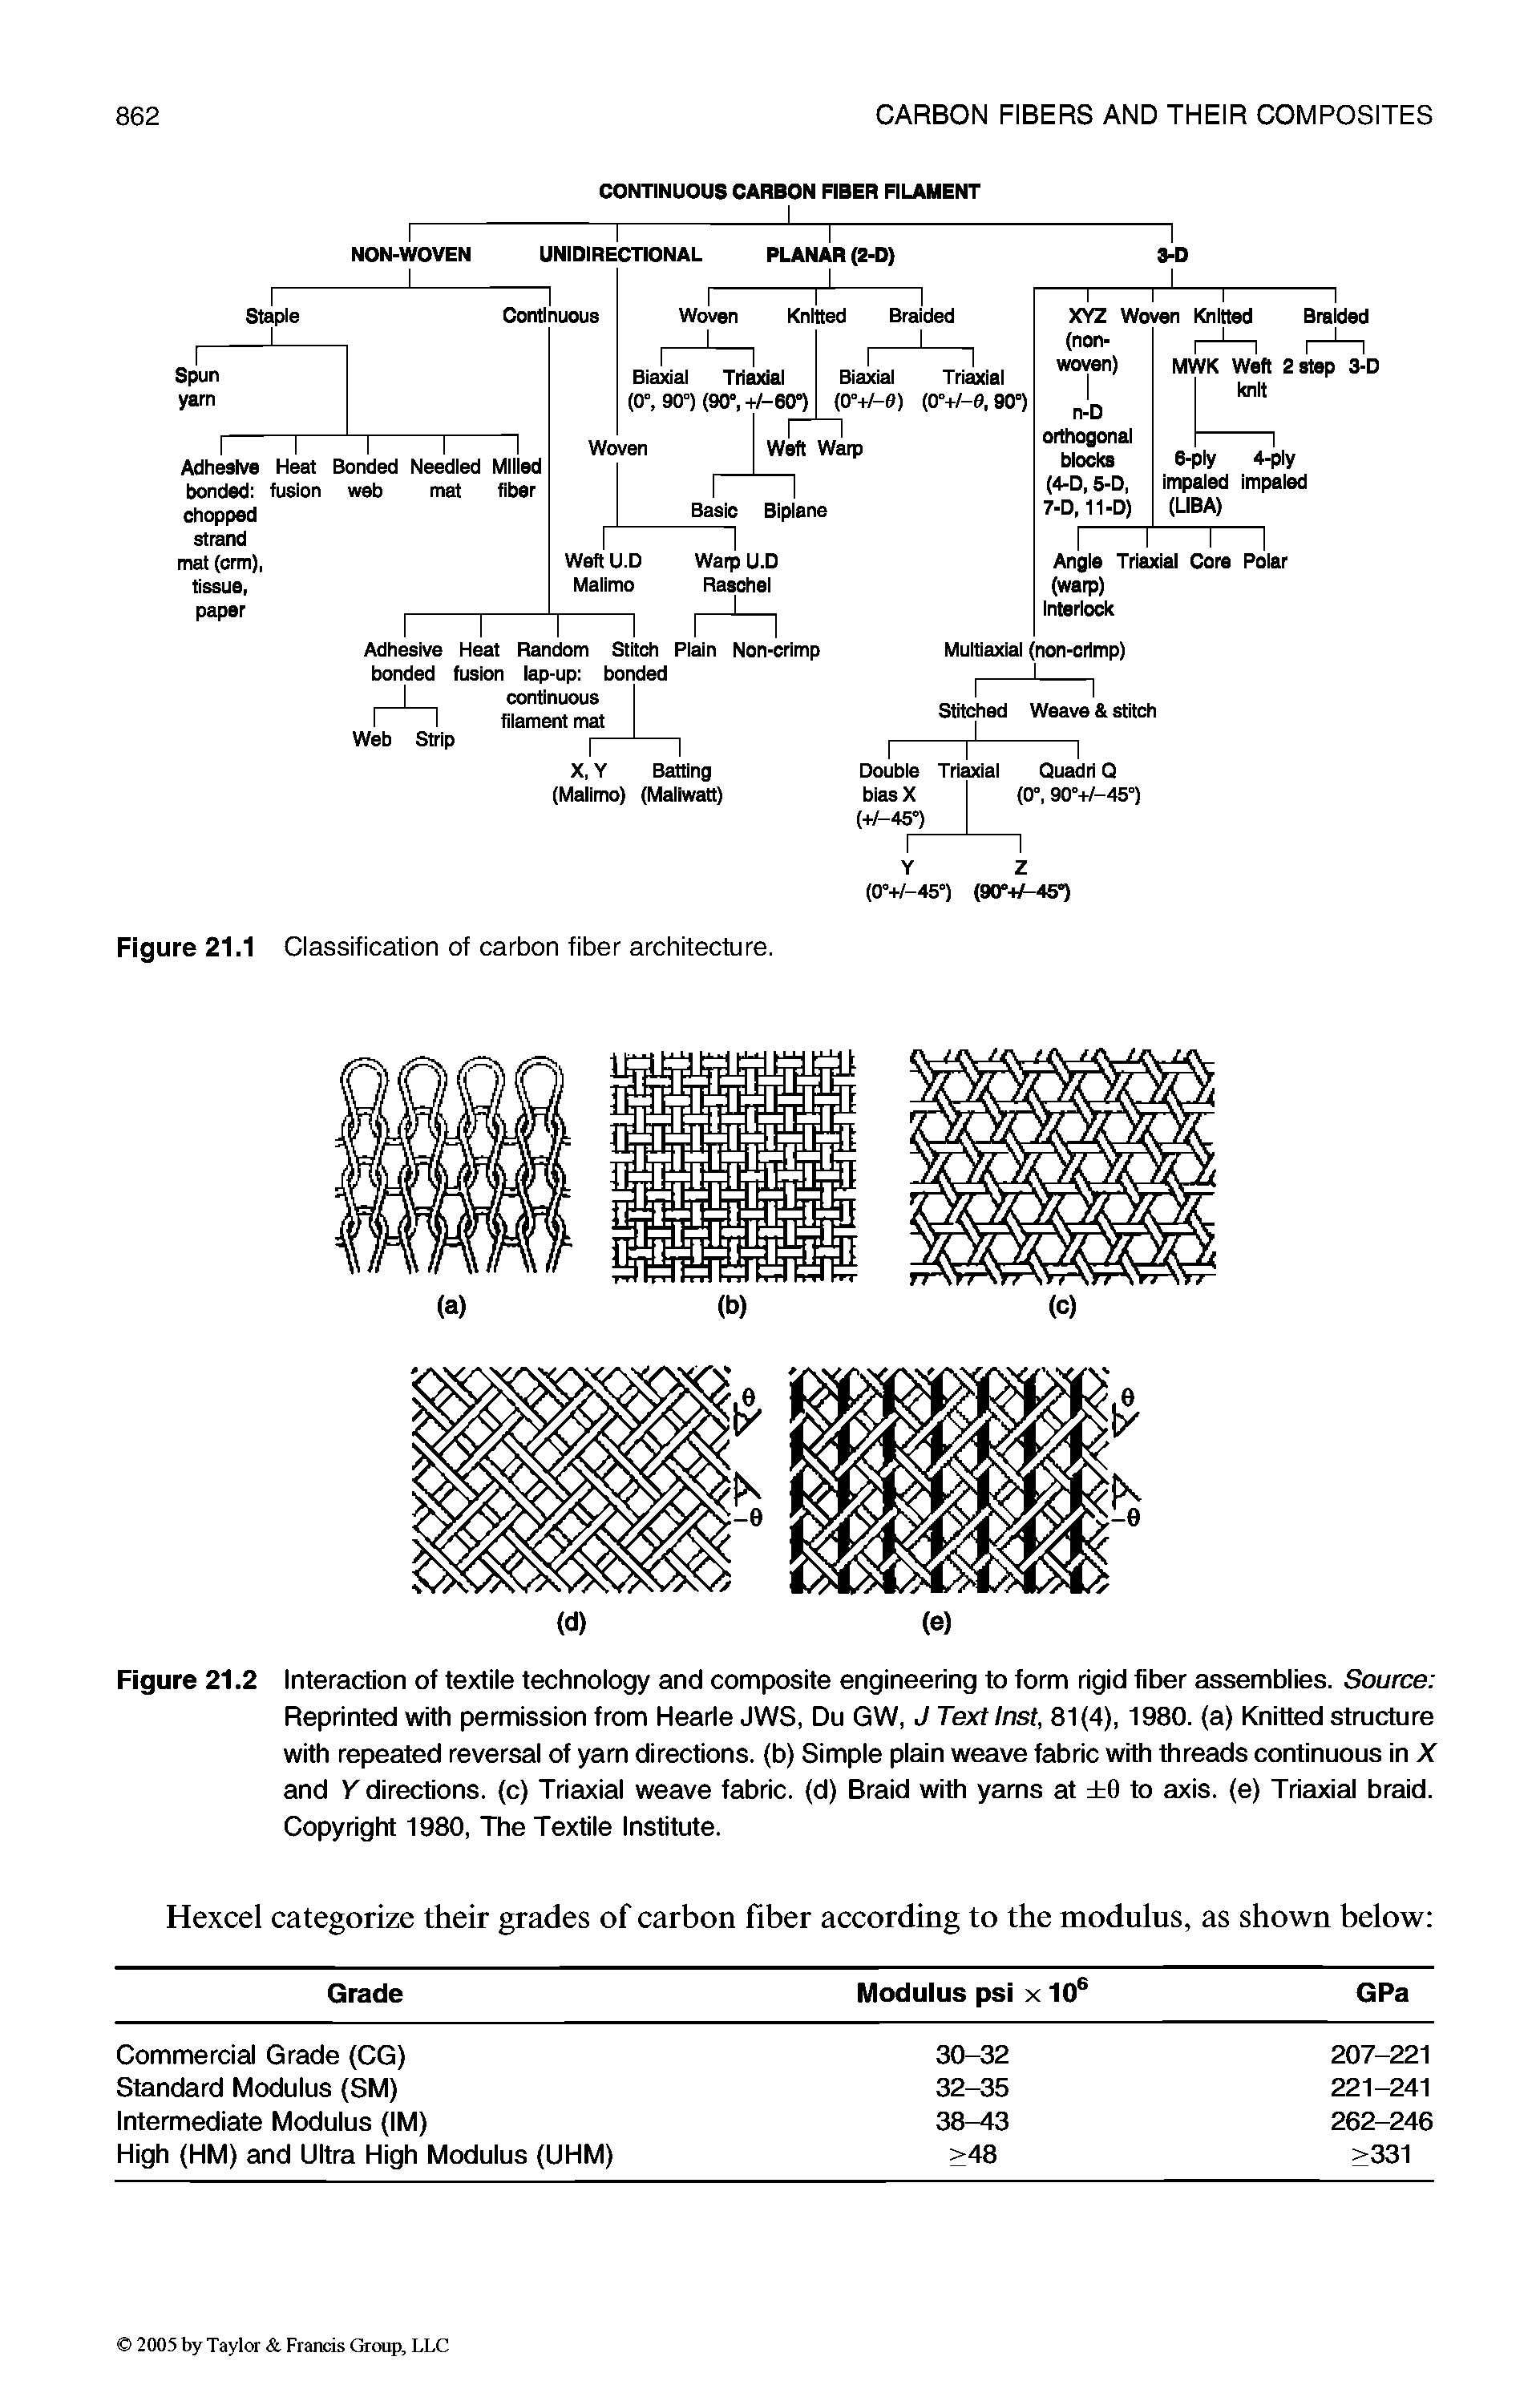 Figure 21.2 Interaction of textile technology and composite engineering to form rigid fiber assemblies. Source Reprinted with permission from Hearle JWS, Du GW, J Text Inst, 81(4), 1980. (a) Knitted stmchire with repeated reversal of yam directions, (b) Simple plain weave fabric with threads continuous in X and Y directions, (c) Triaxial weave fabric, (d) Braid with yams at 9 to axis, (e) Triaxial braid. Copyright 1980, The Textile Institute.